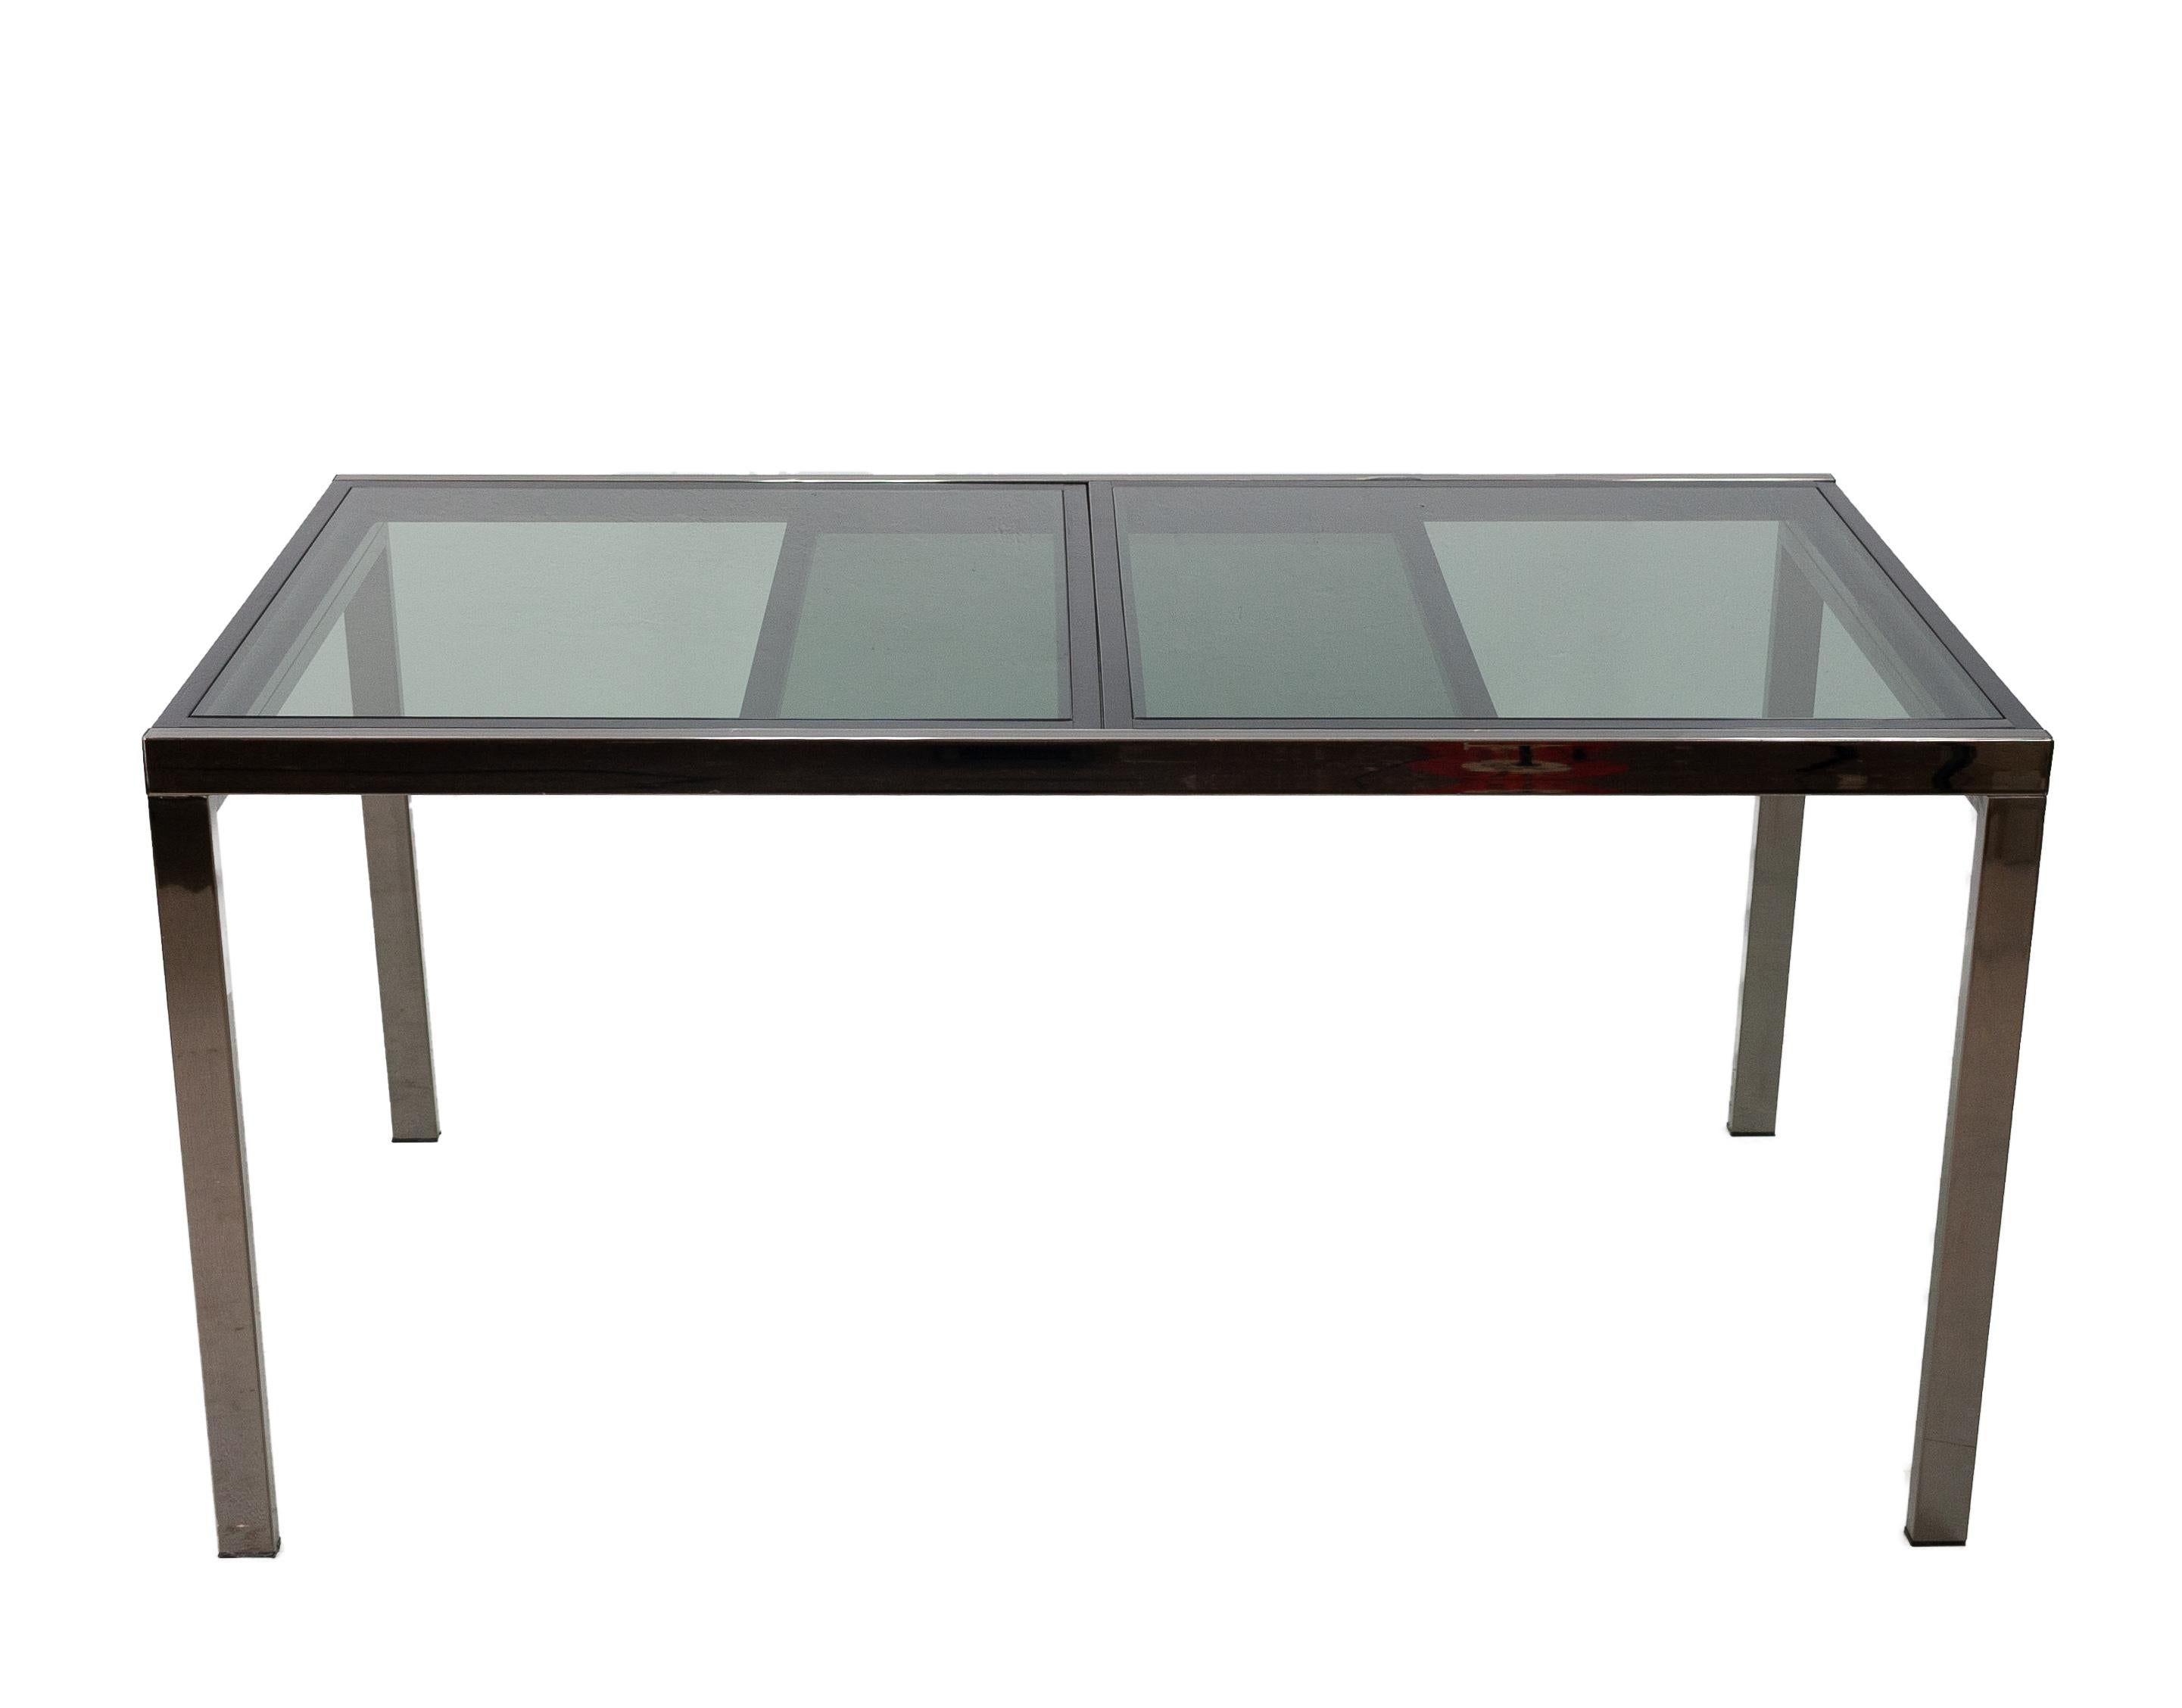 Vintage extendable dining table in grey smoked glass, circa 1970s. The table can be increased from 155 cm to 227 cm. One off the first editions off this table, comes width a black ebonized wooden frame, witch hold the grey smoked glass, the steel